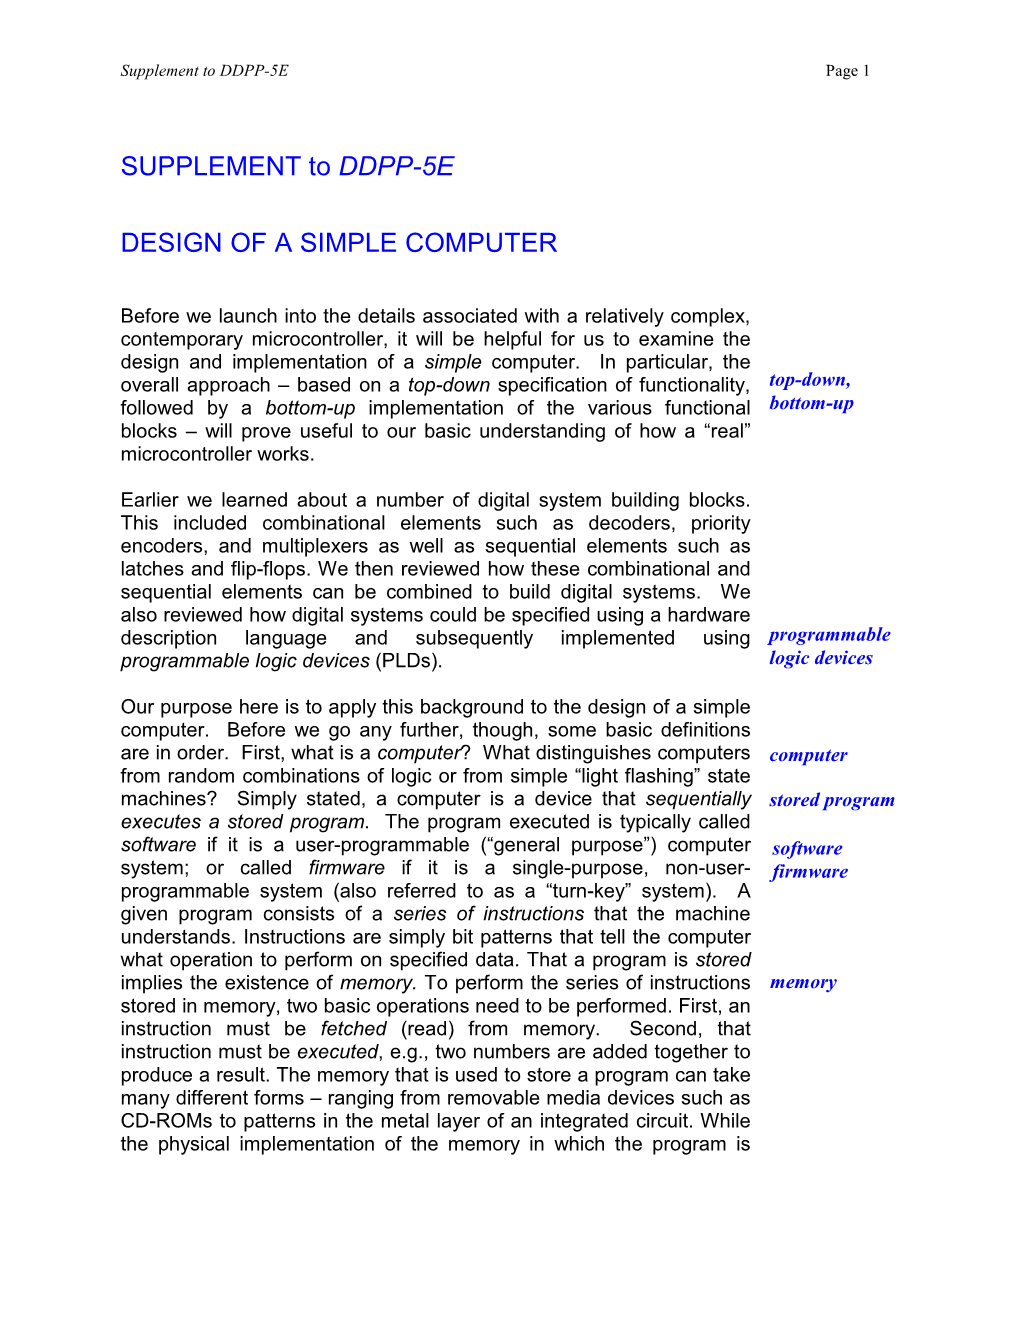 Supplemental Text Chapter on the Simple Computer